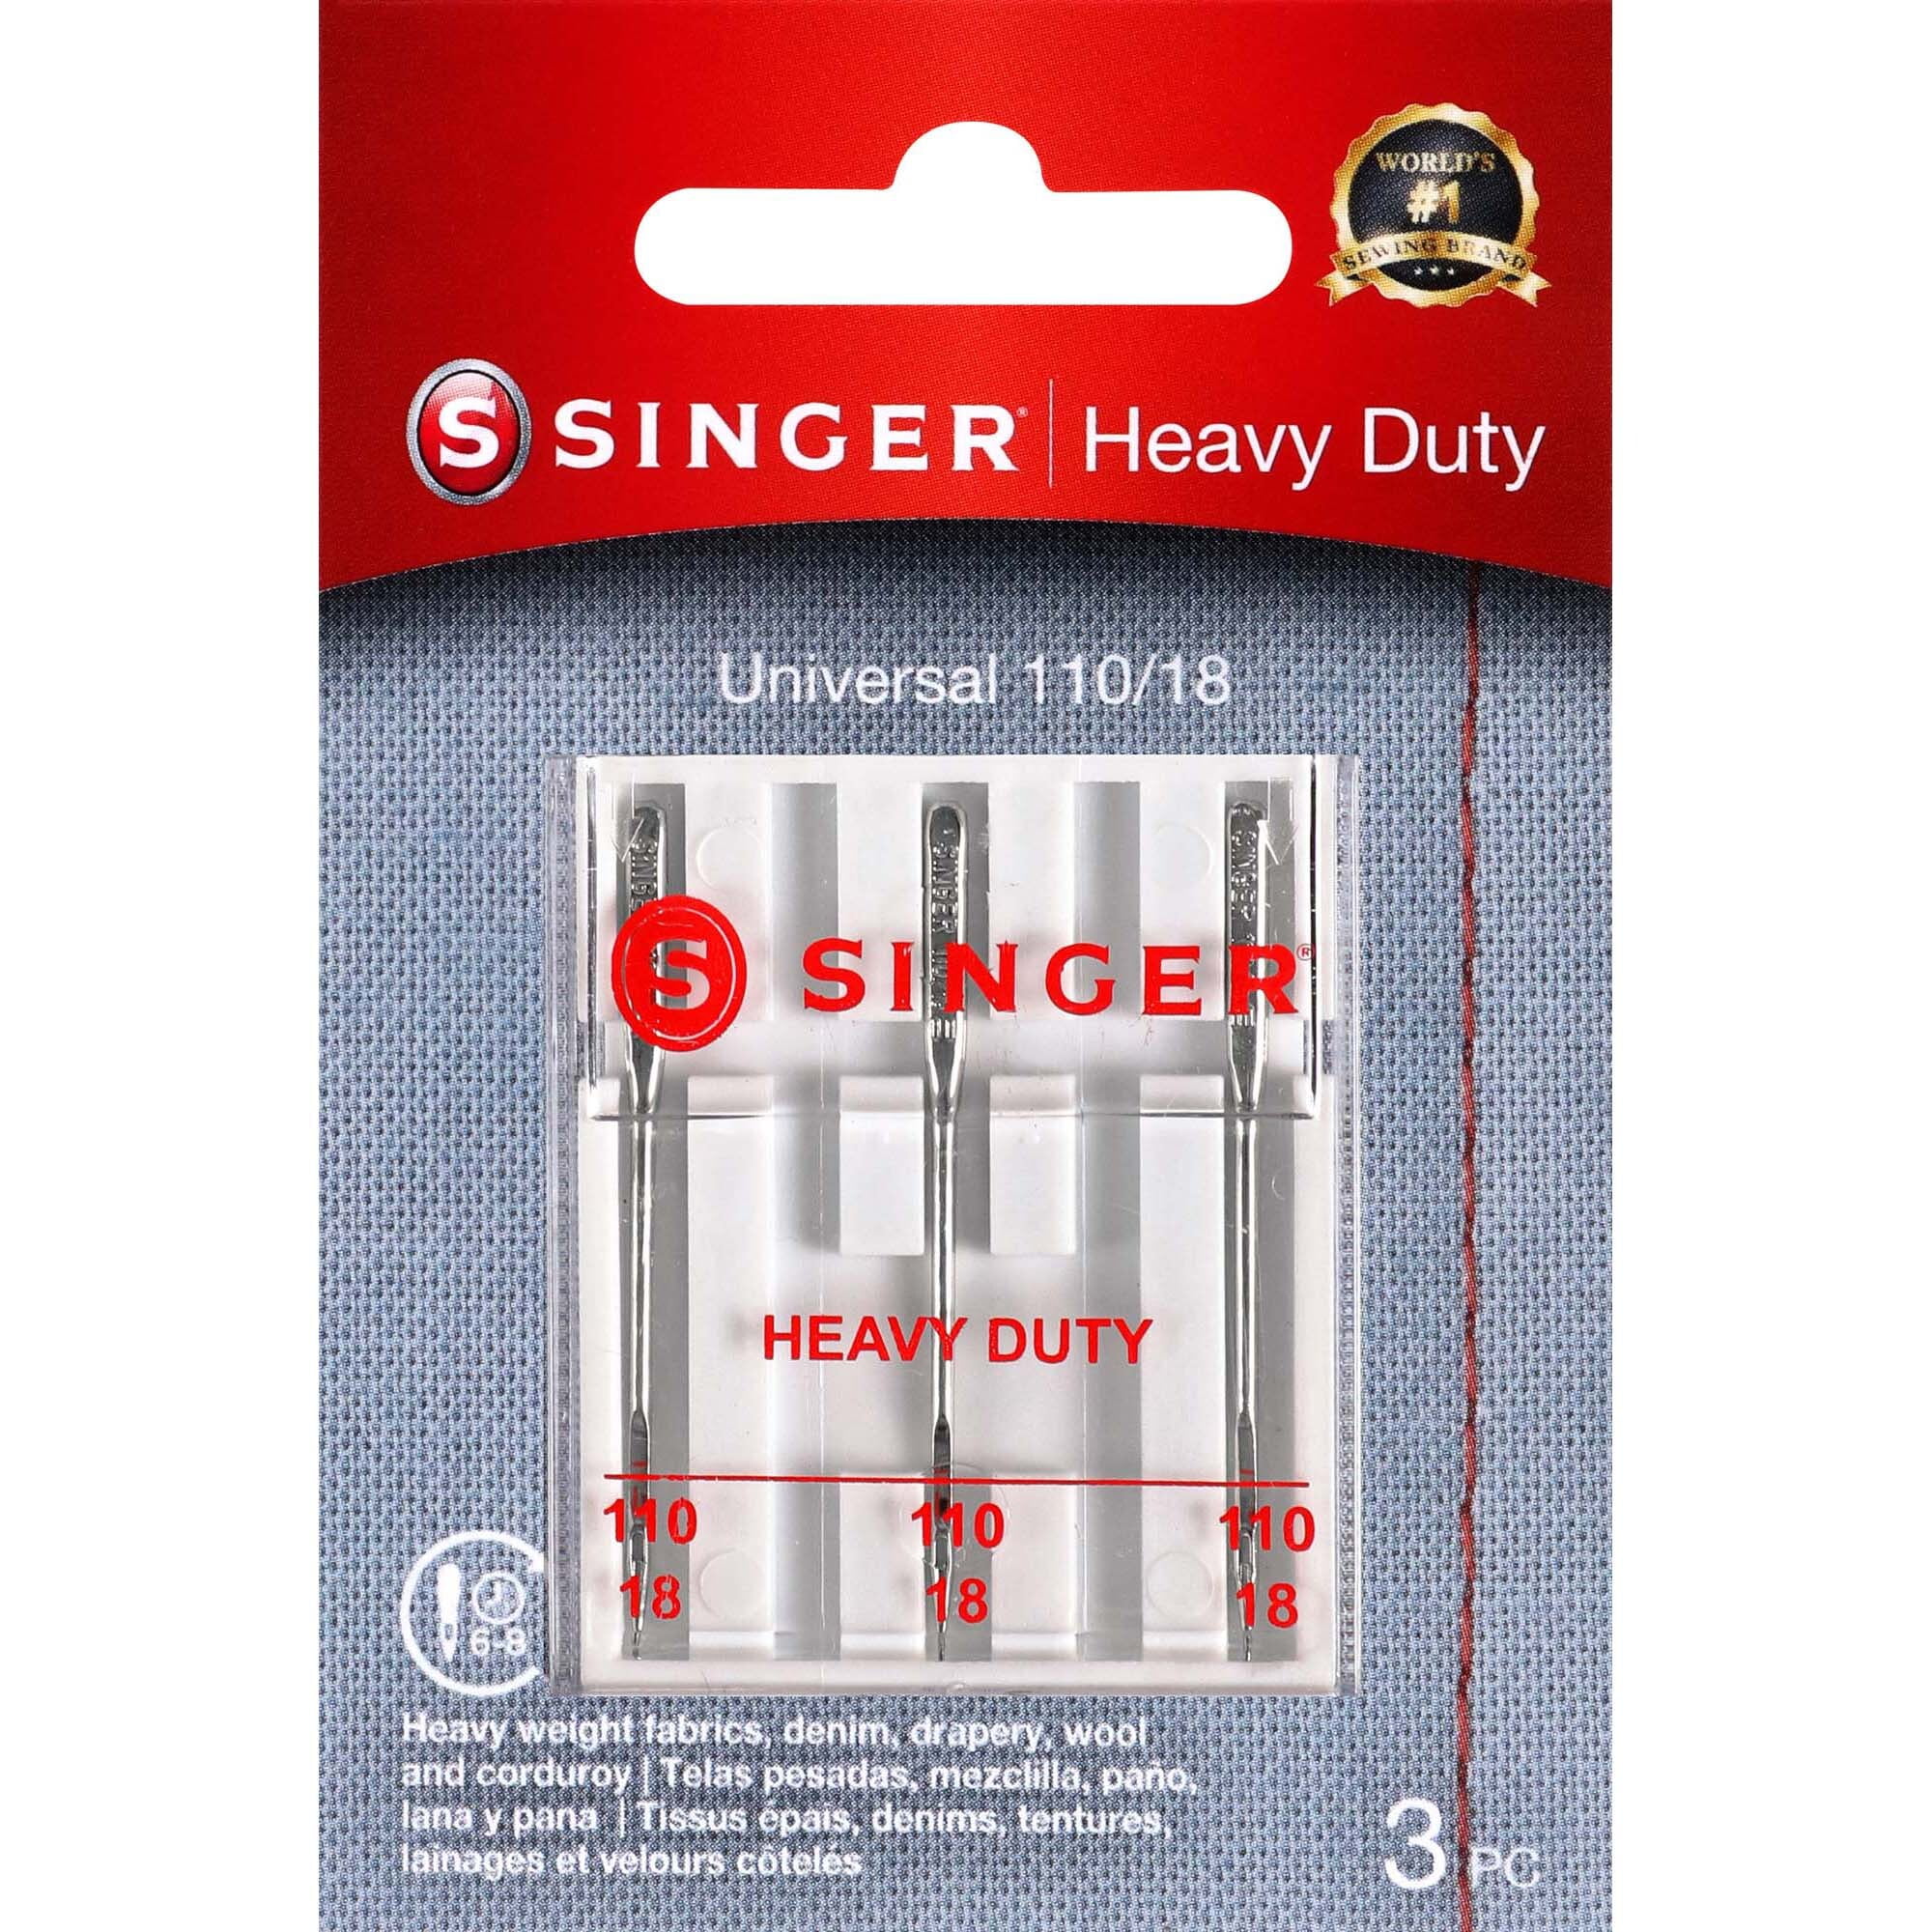 SINGER Heavy Duty Sewing Machine Needles, Size 110/18 - 3 Count